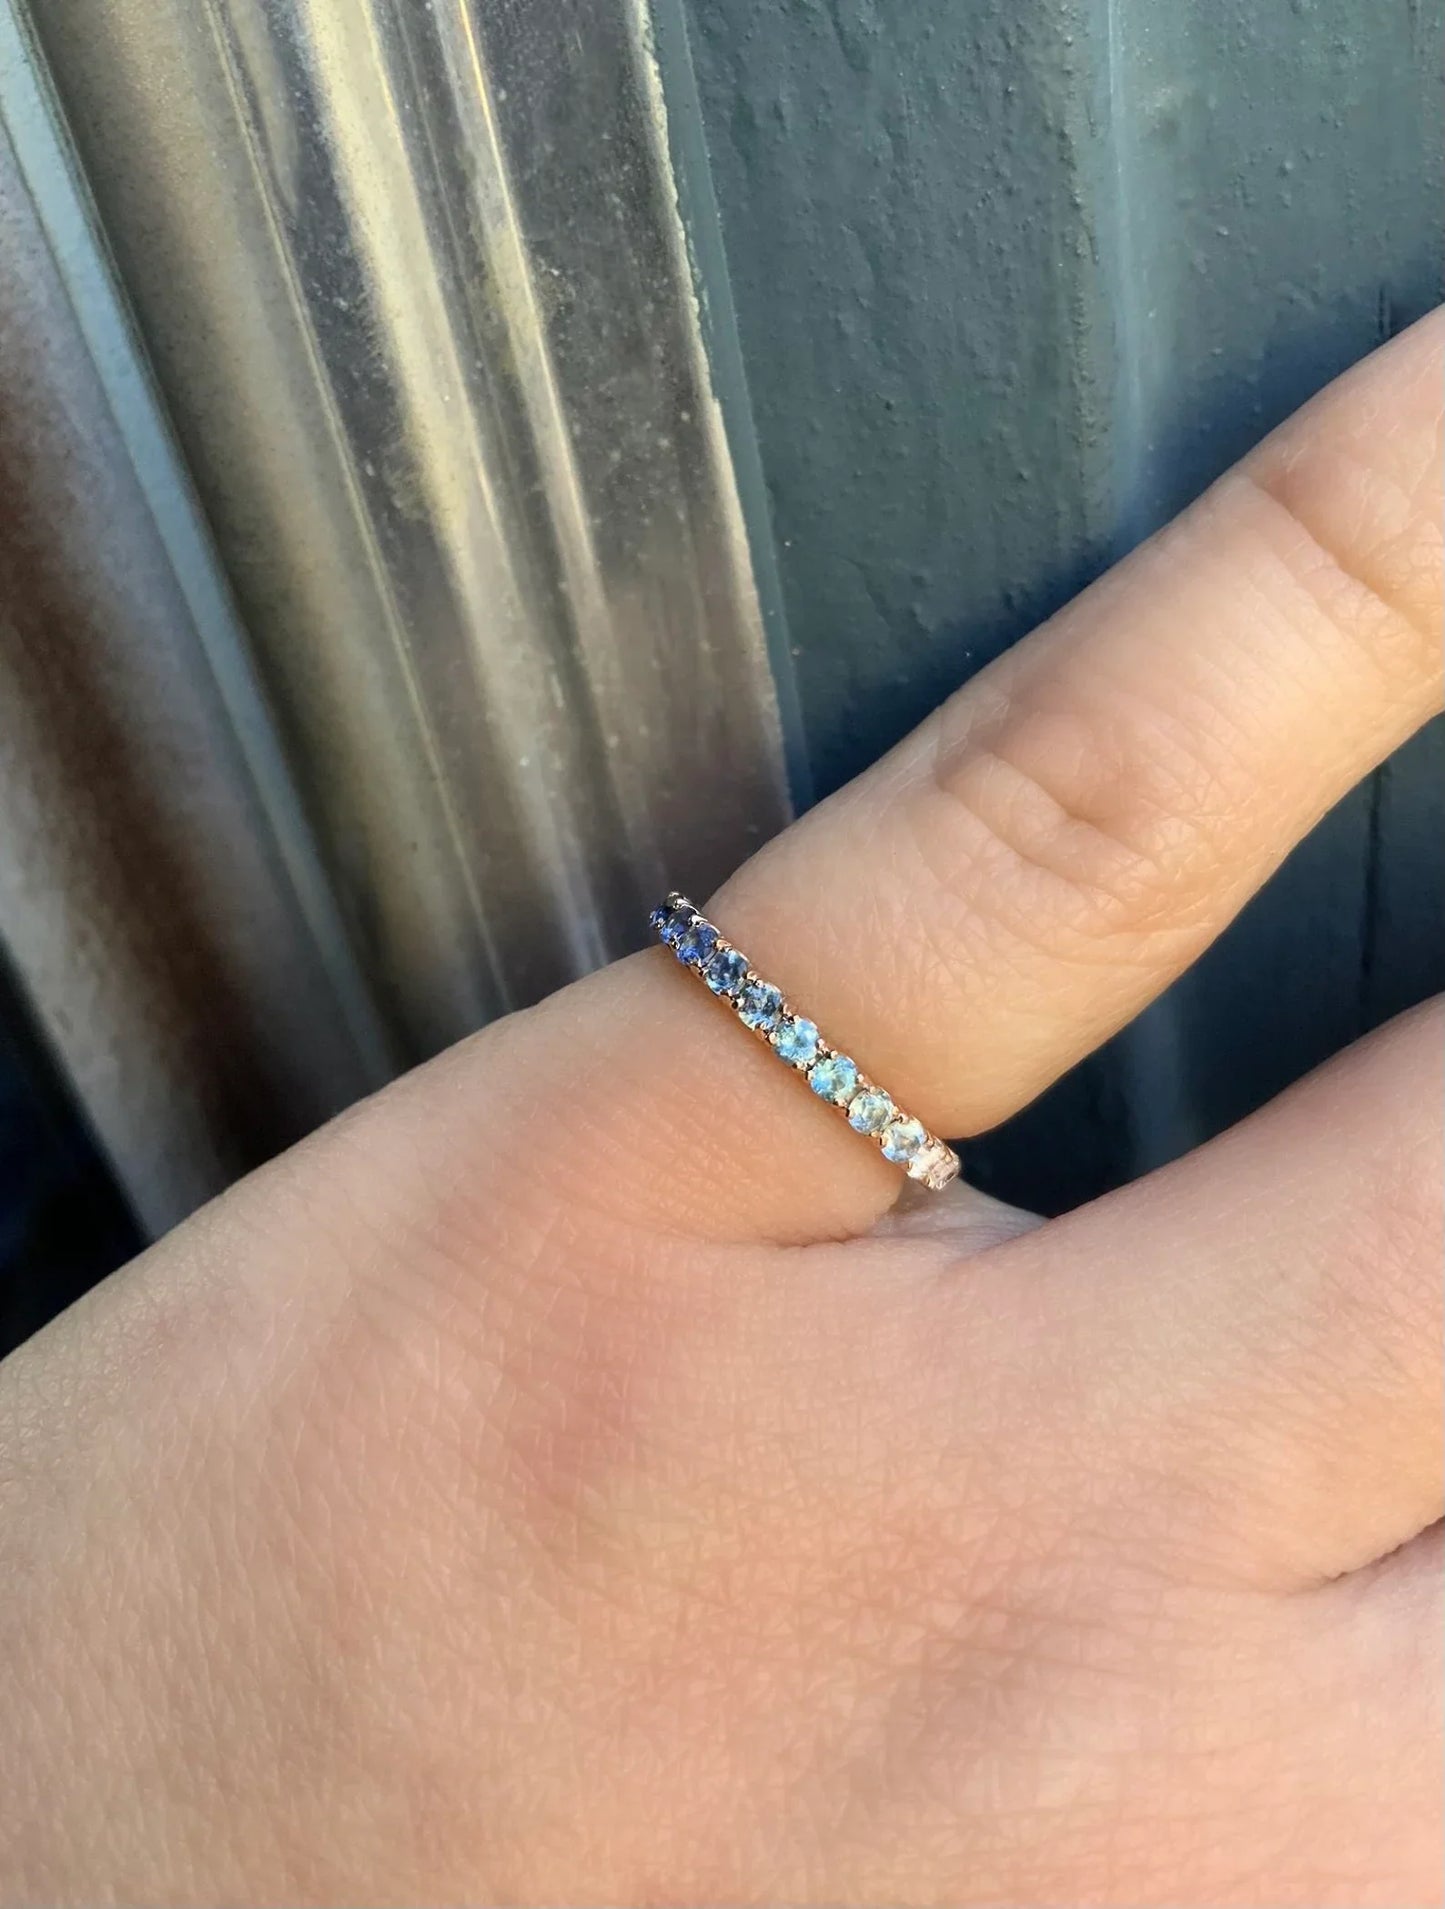 Reserved for Amber/ Diamond Wedding Band with Graduating Blue on Sides